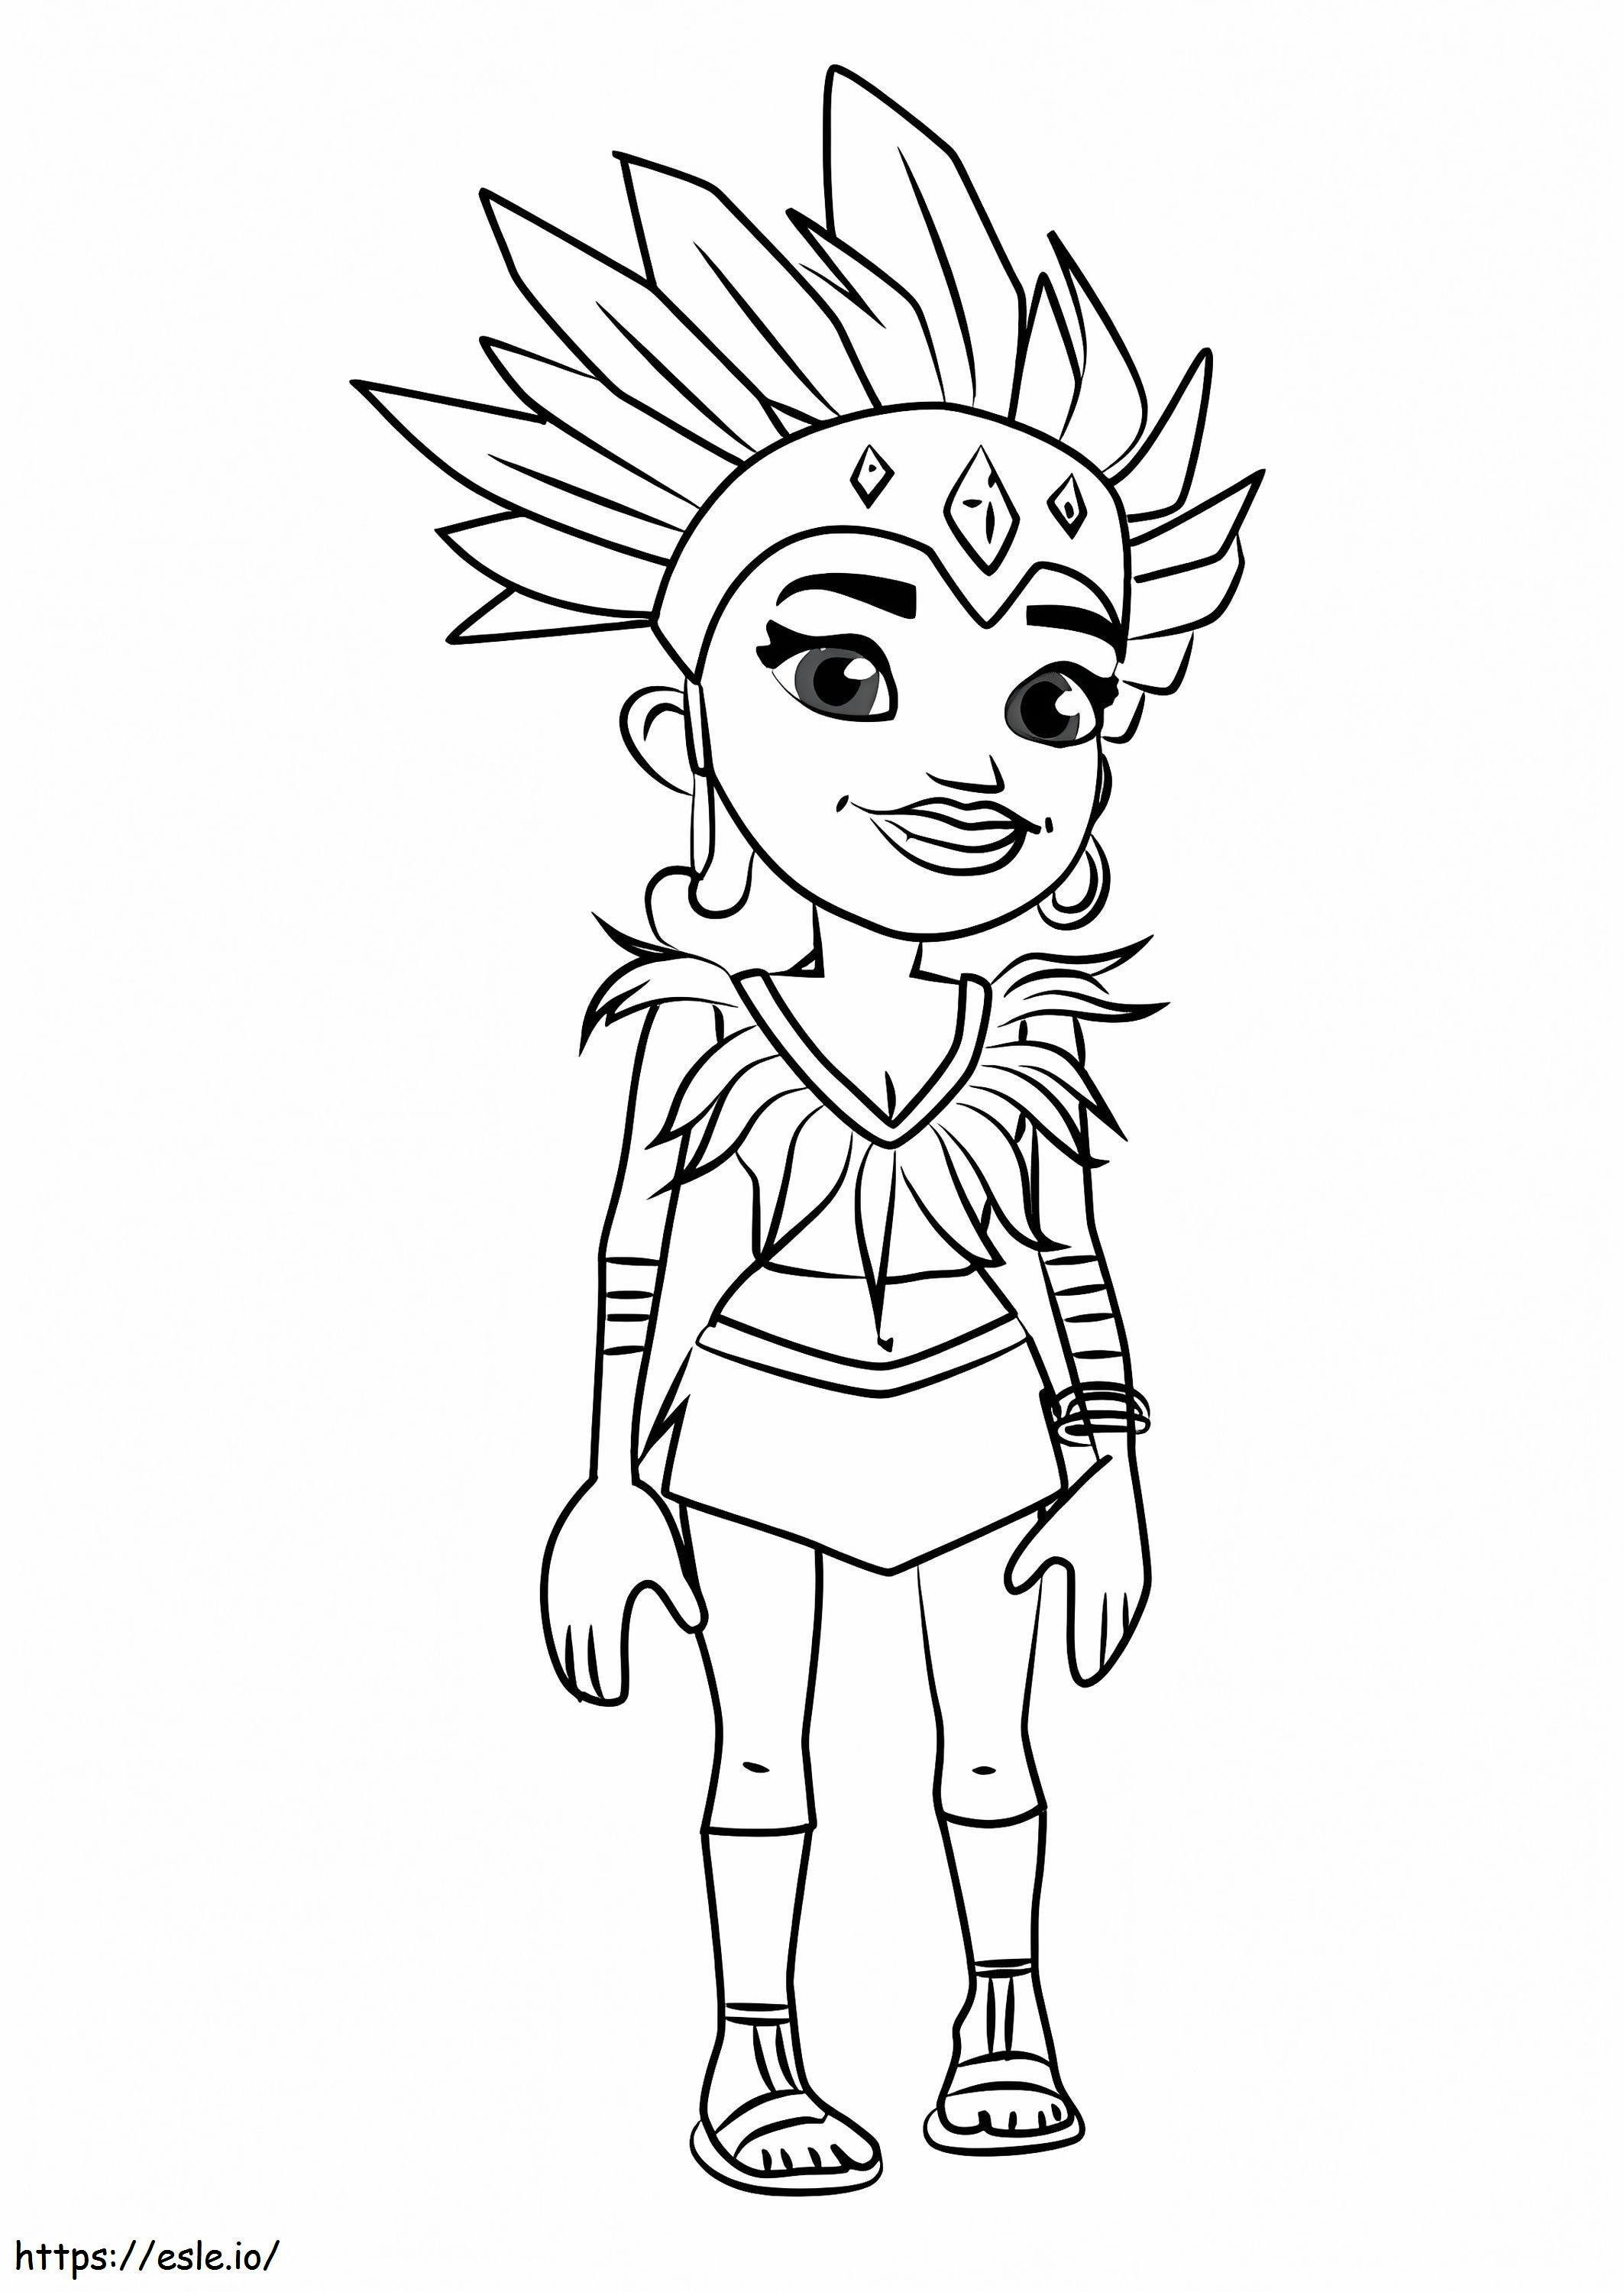 Carmen From Subway Surfers coloring page